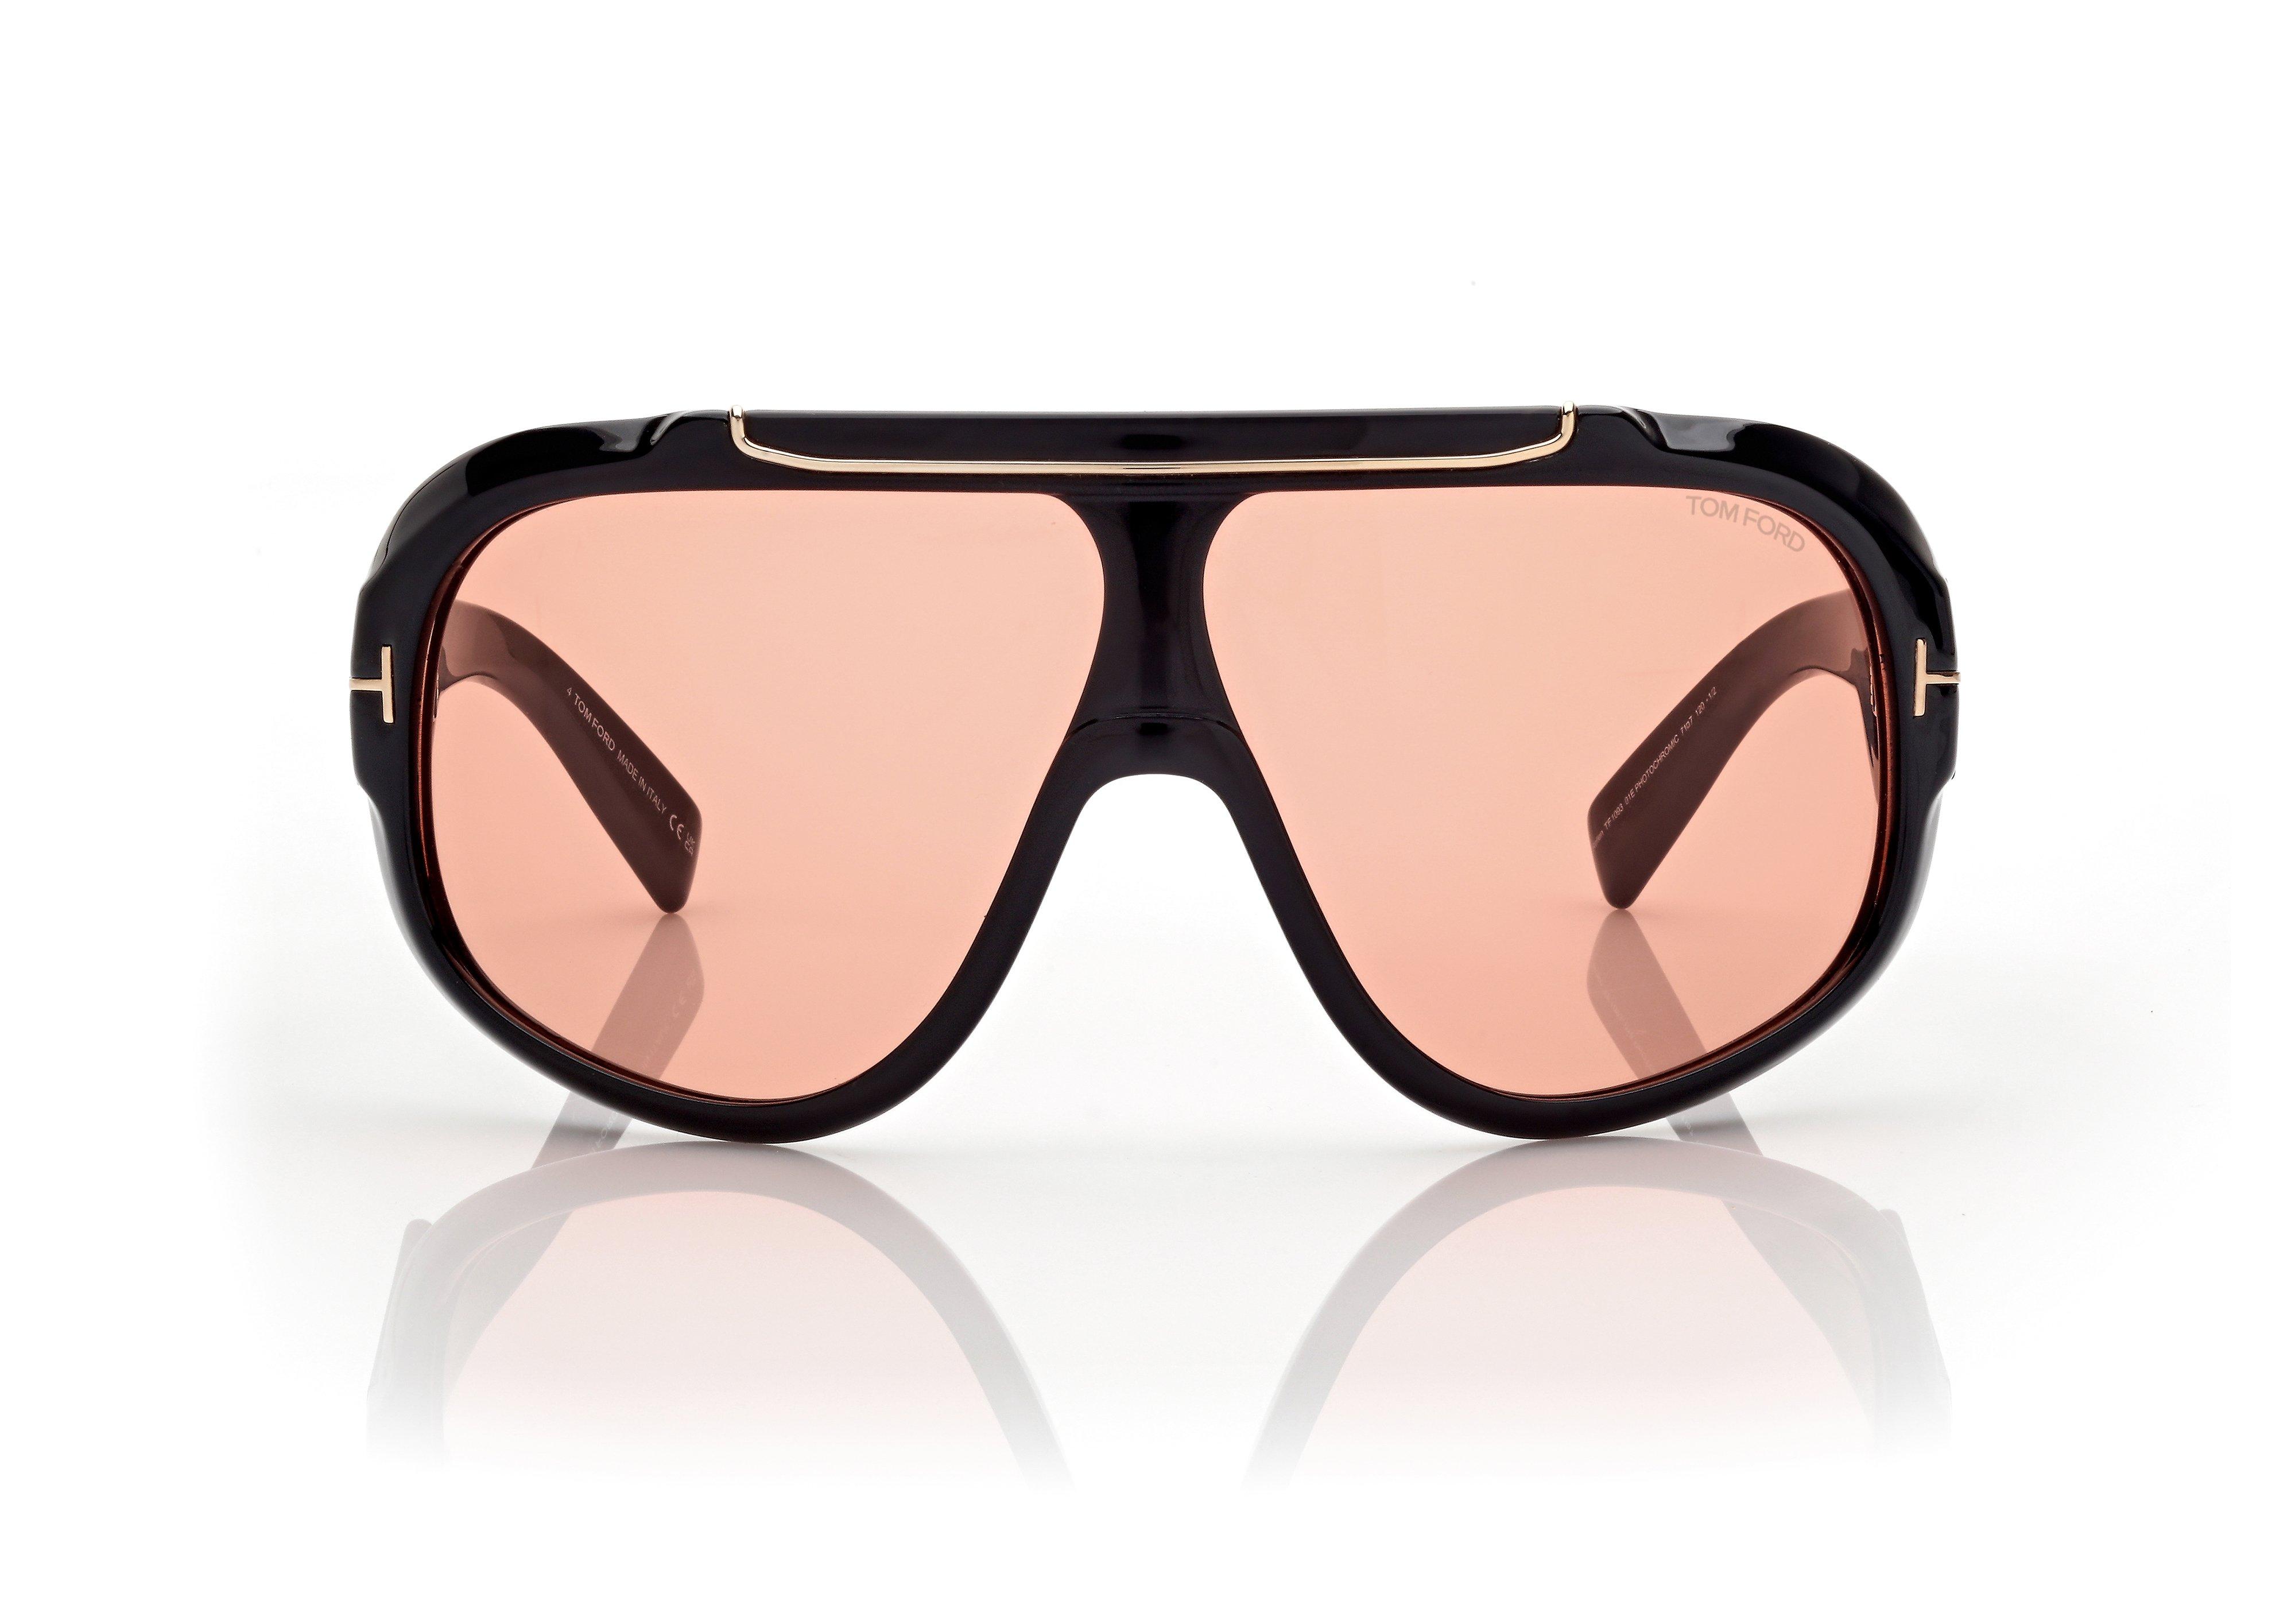 lenshop on X: The Tom Ford sunglasses are ideal for a wide range